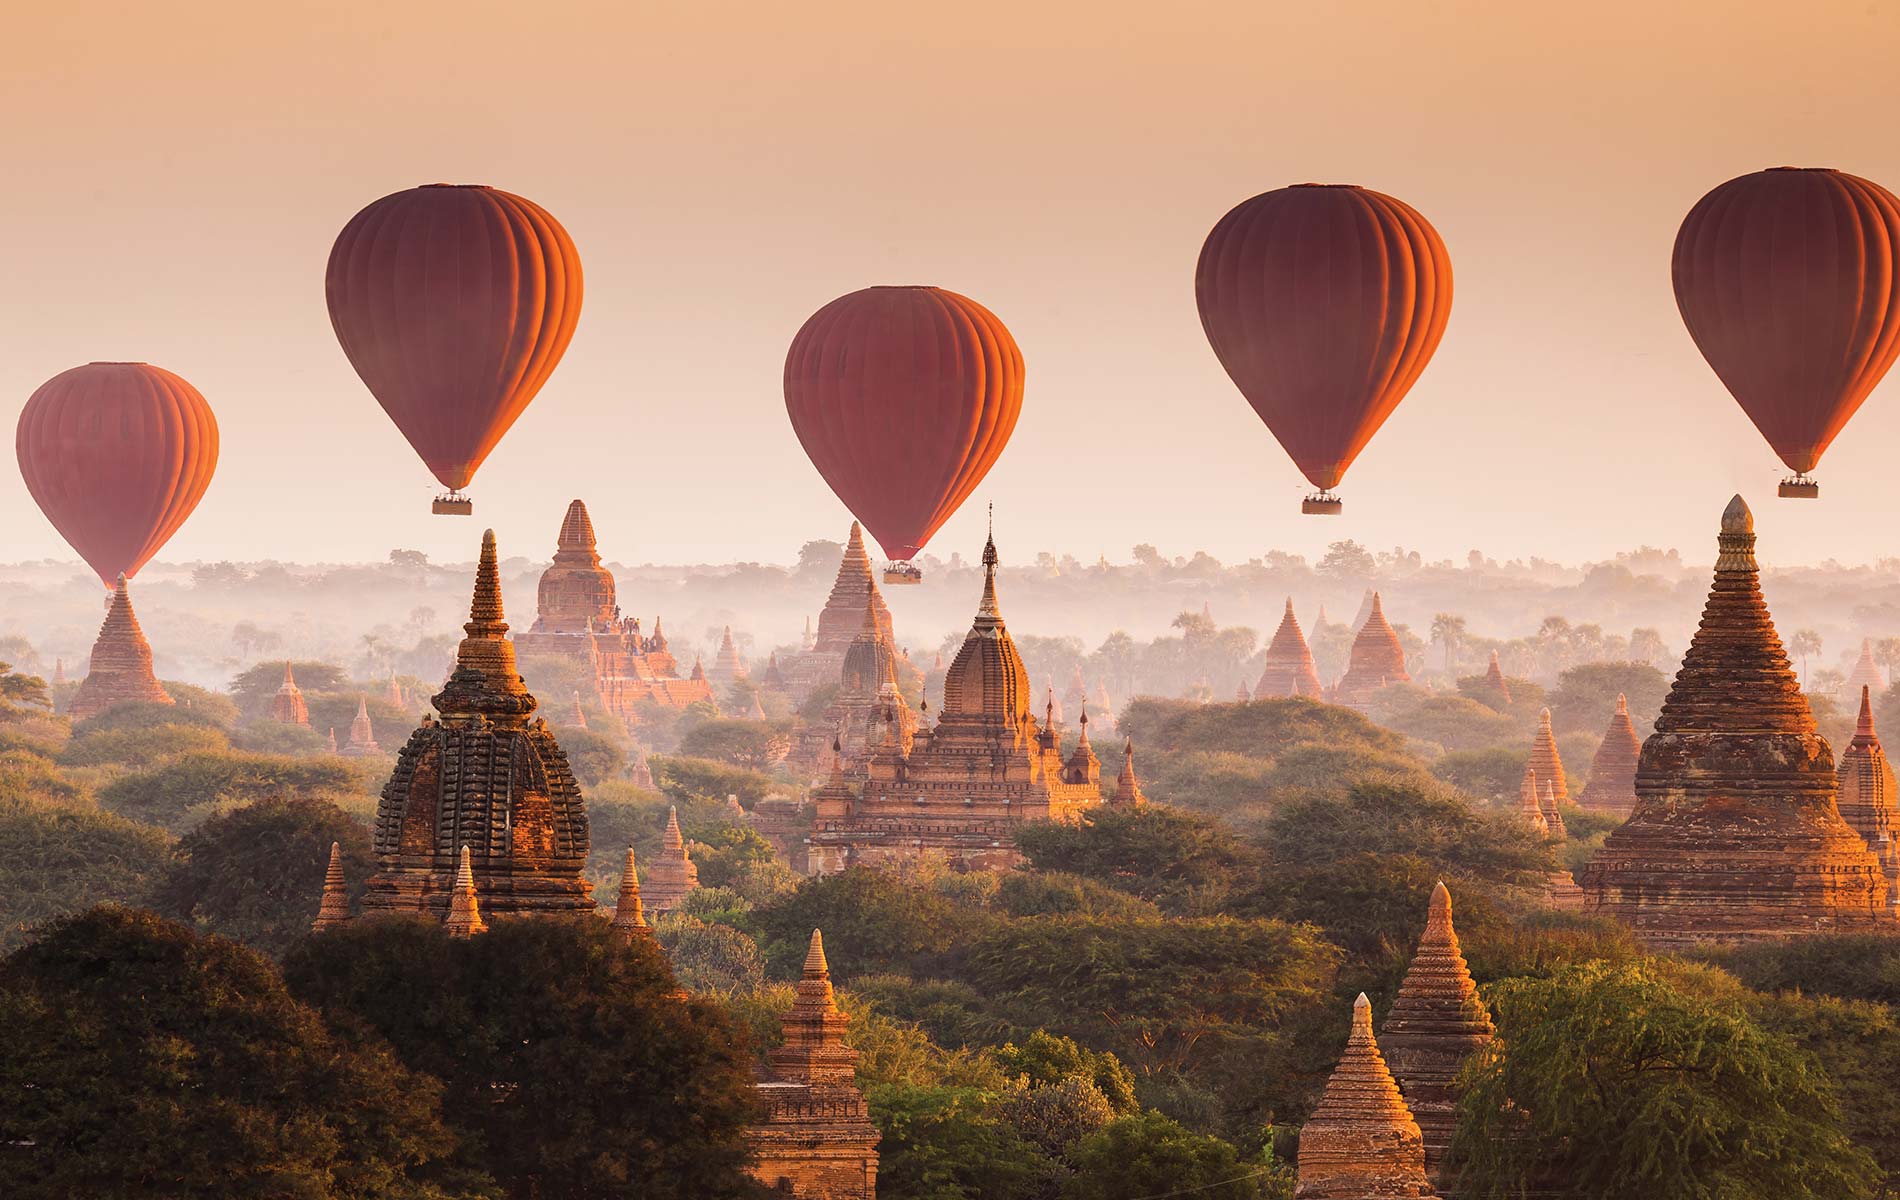 Hot air balloons soaring over the ancient city of Bagan are a quintessential sight of Myanmar. See them for yourself on Acanela’s Myanmar and Laos expedition.